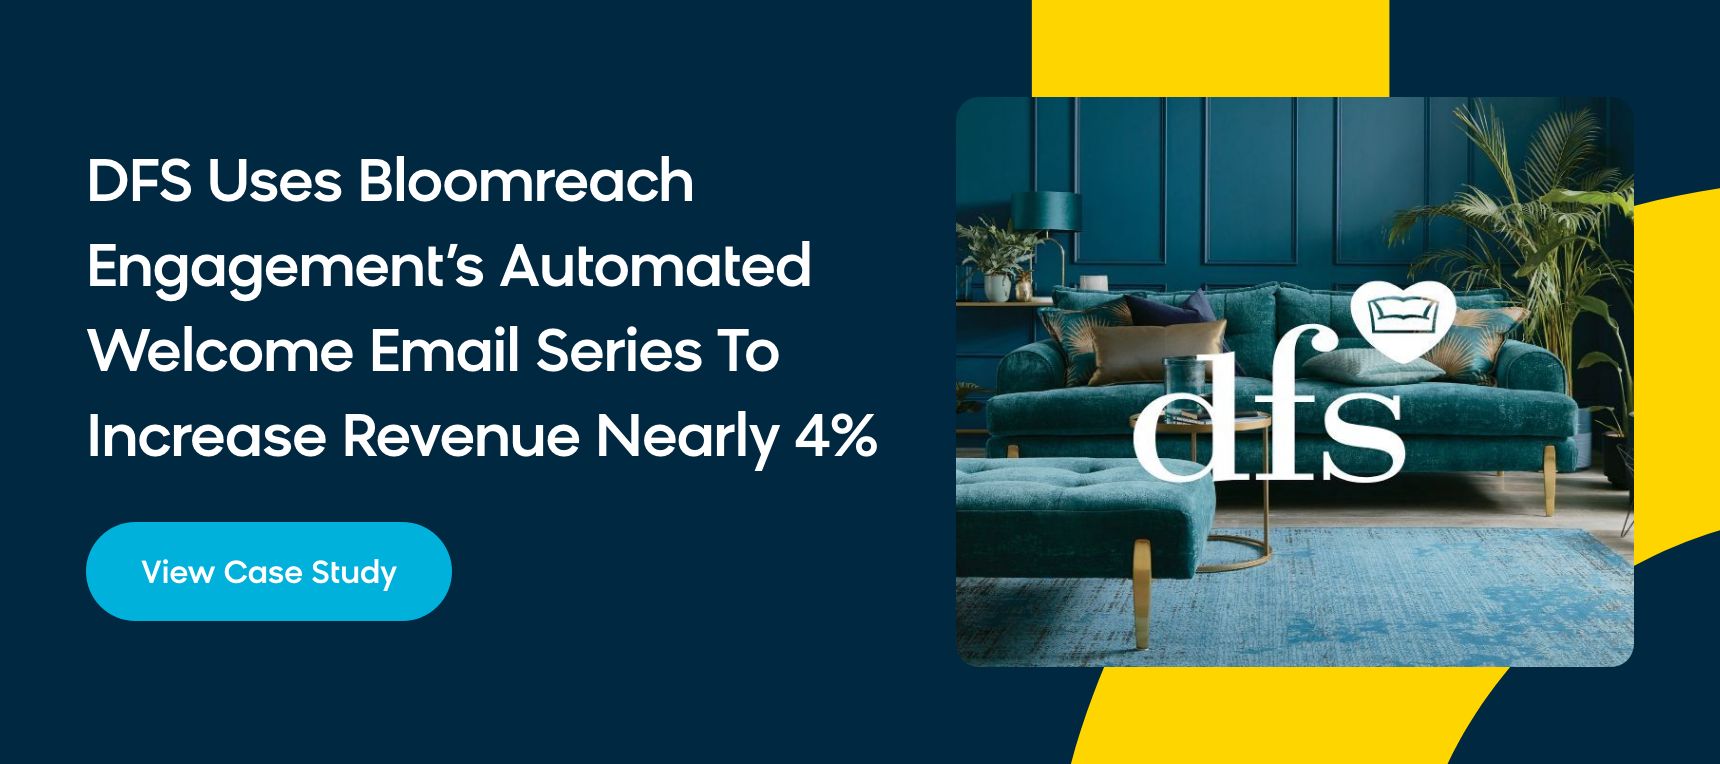 DFS case study with Bloomreach